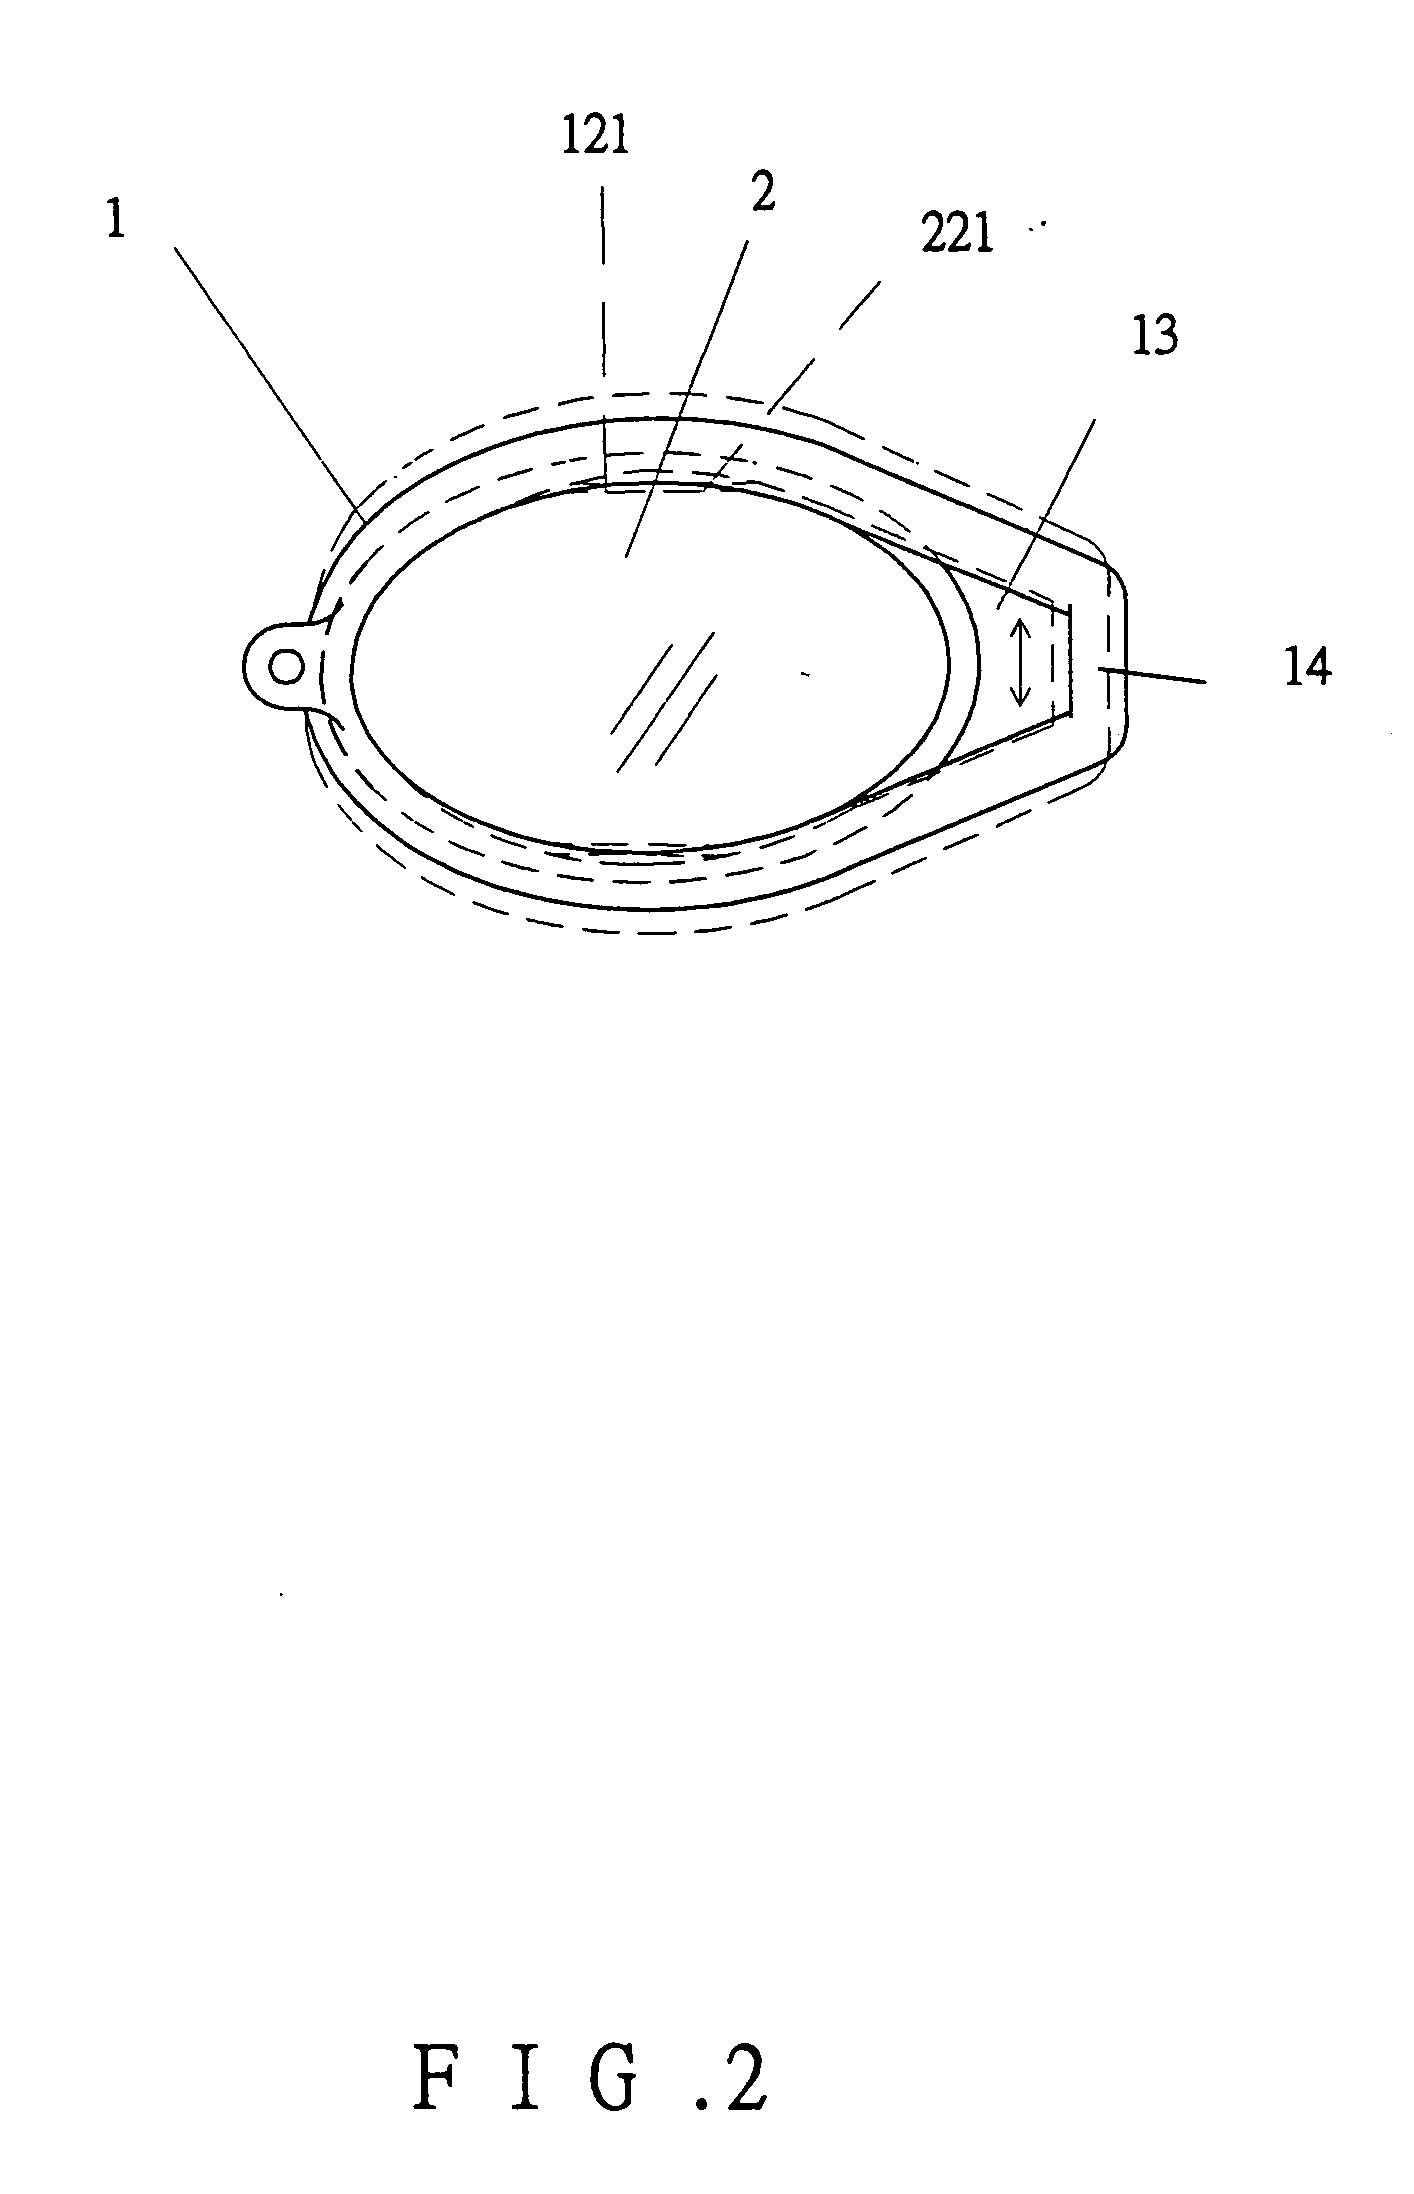 Frame/lens combination for swimming goggles